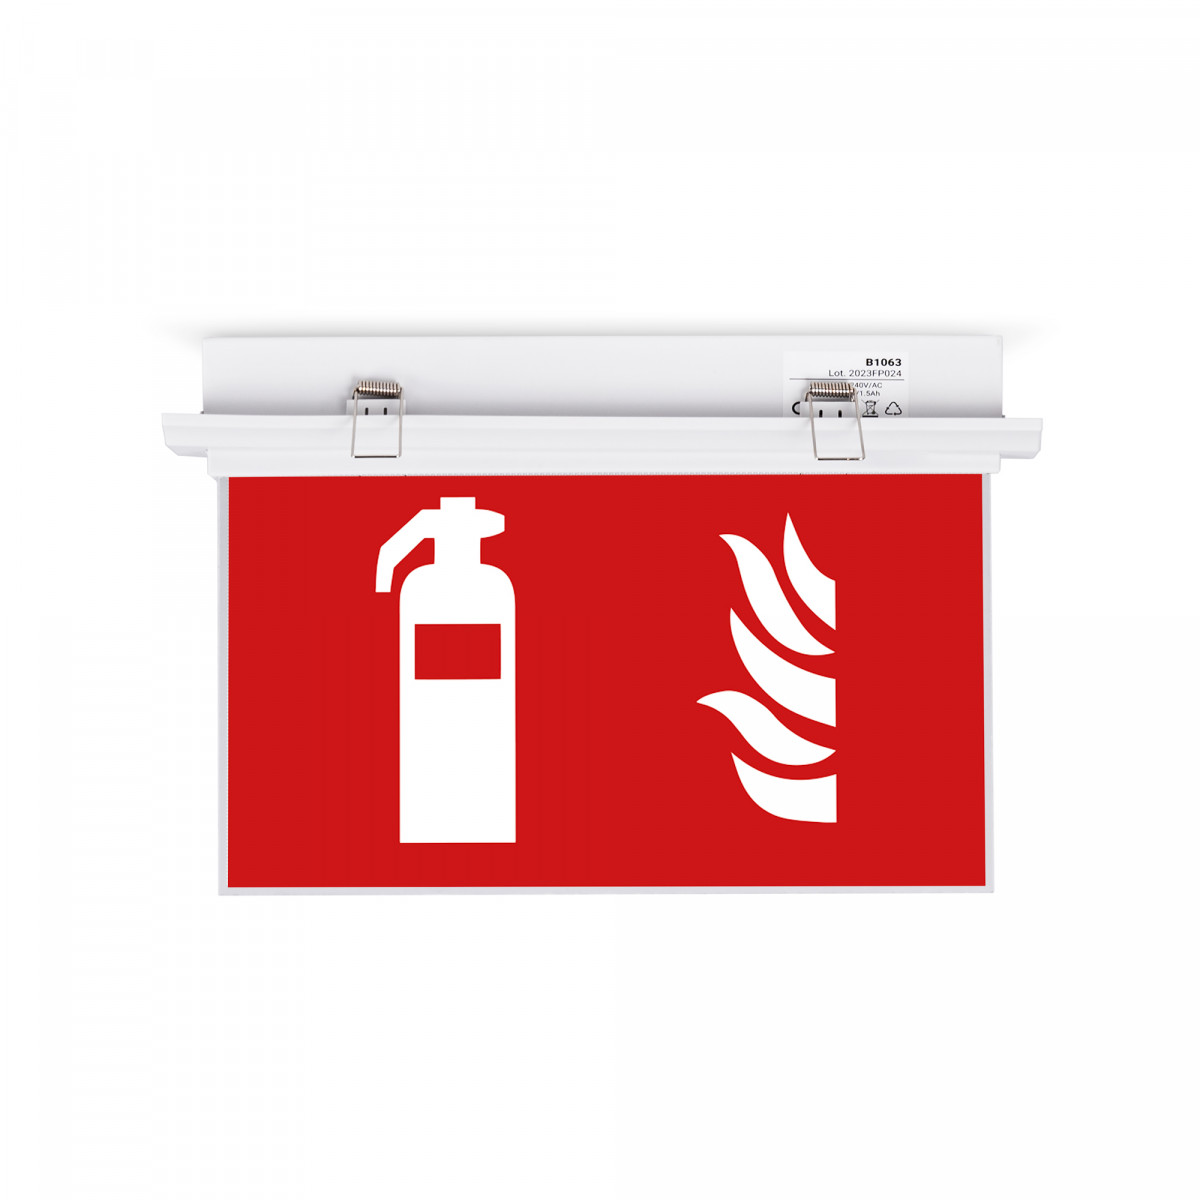 Recessed permanent emergency light with "Fire extinguisher" pictogram